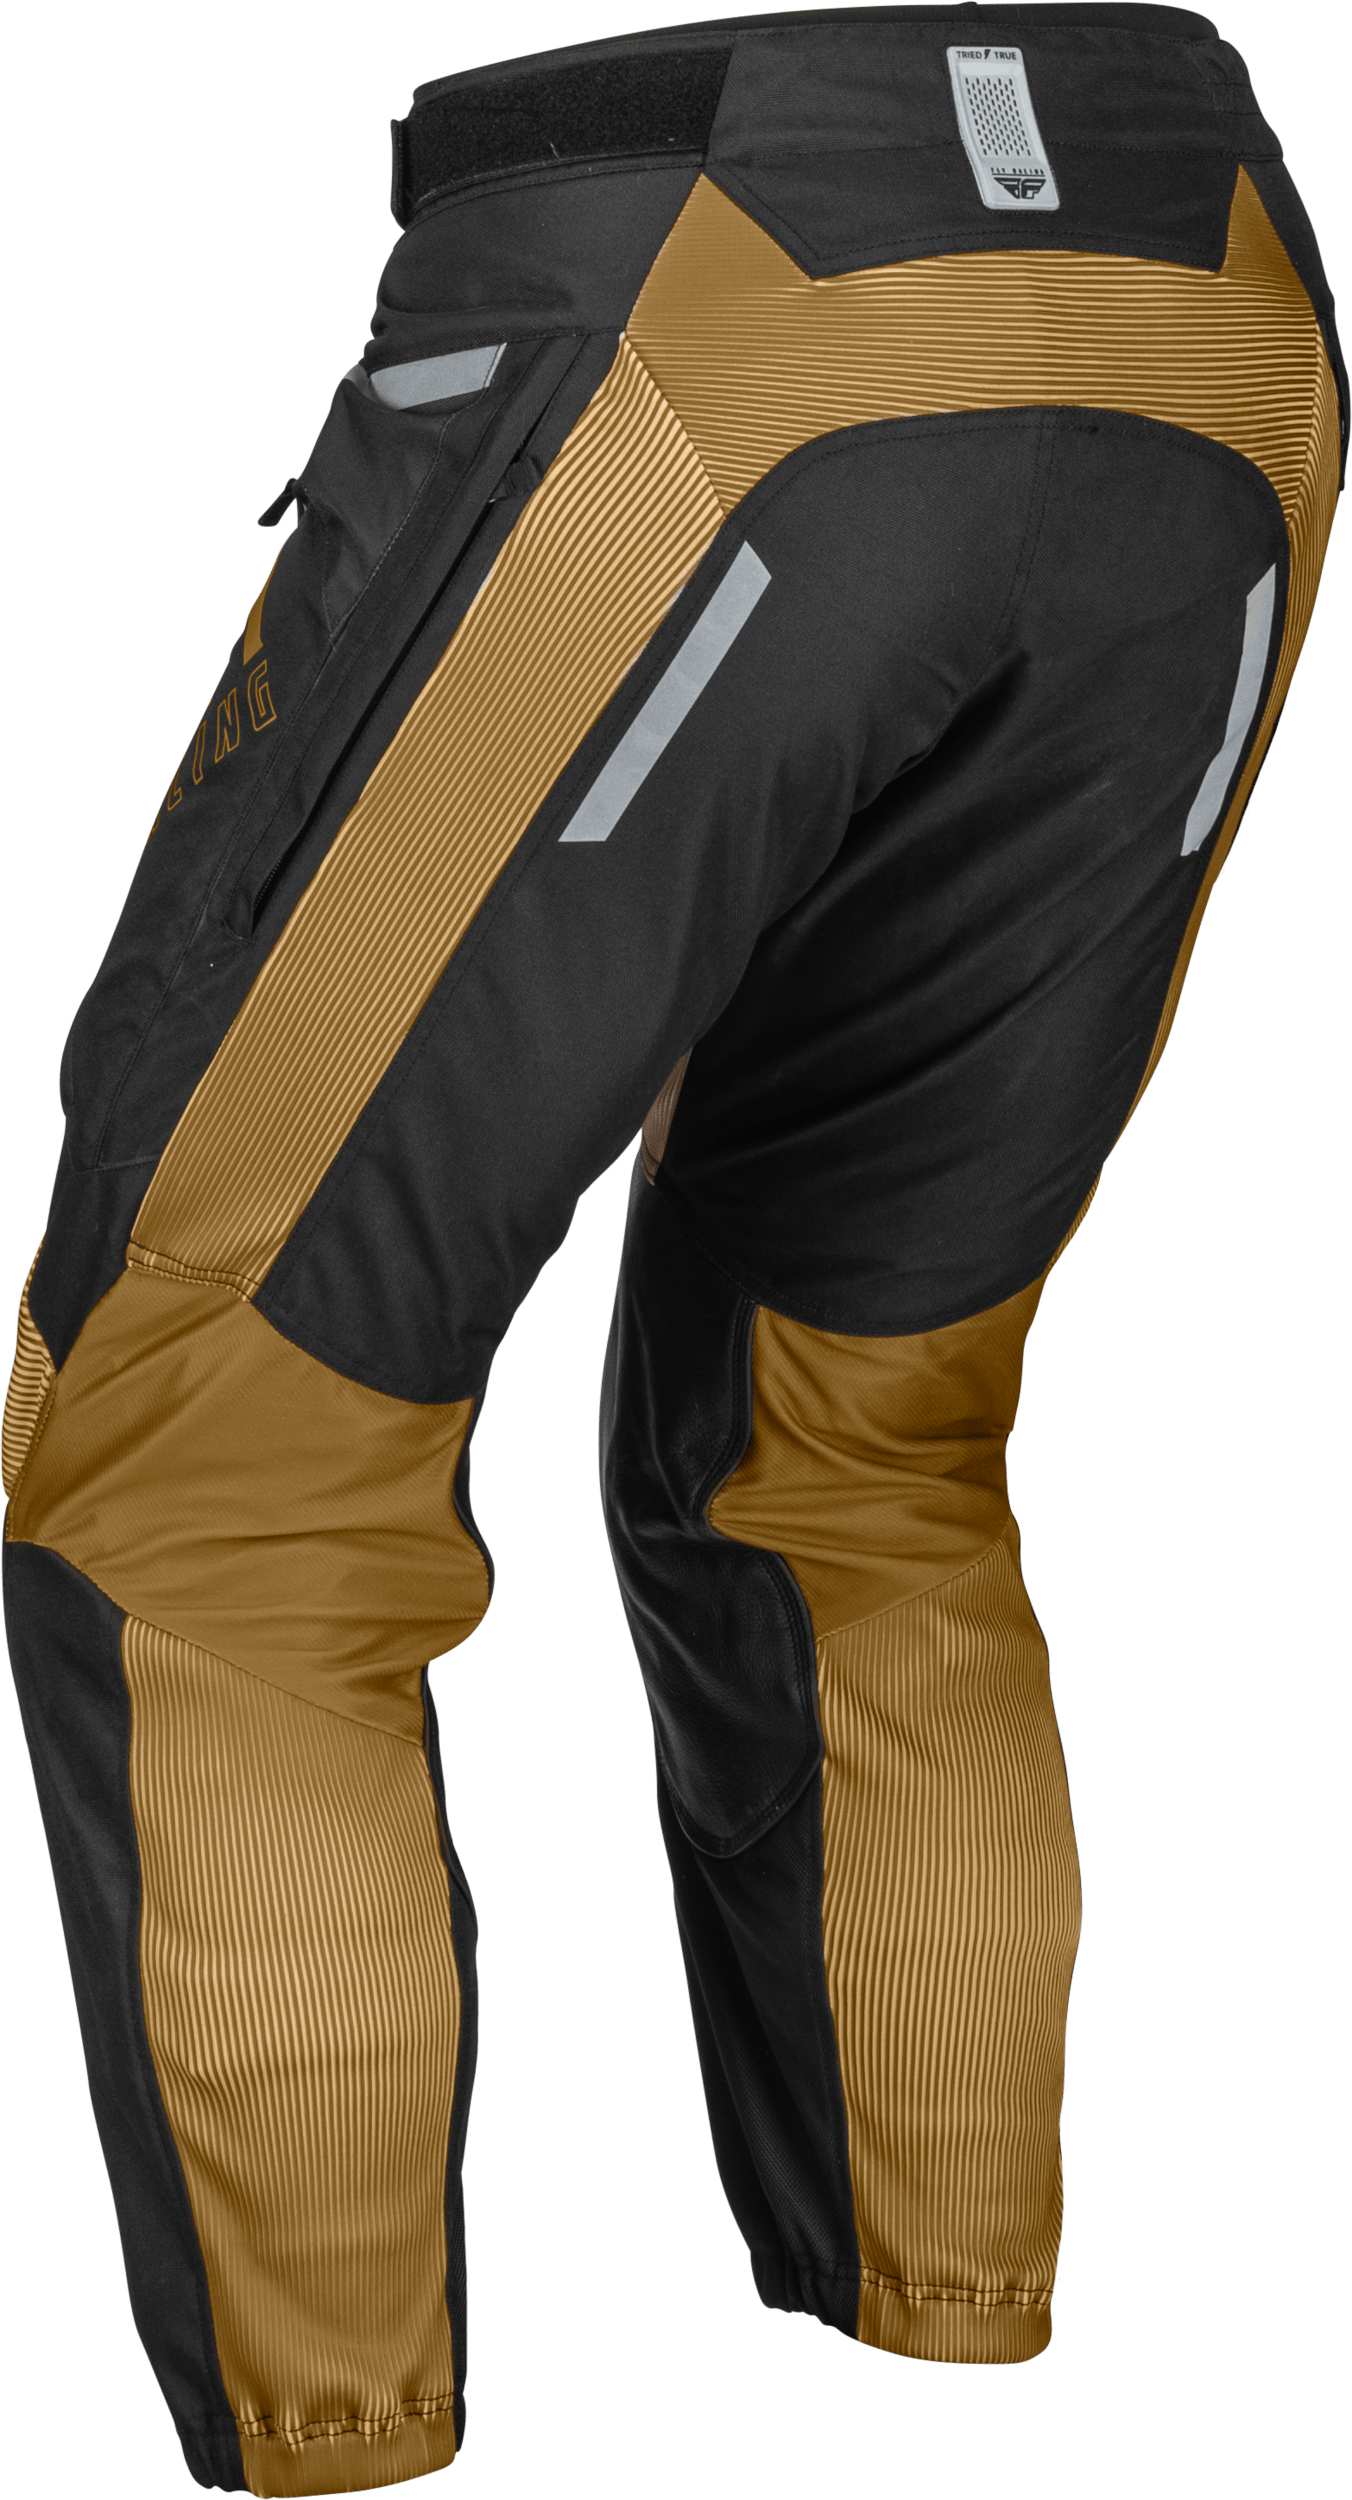 Patrol Pant by Fly Racing